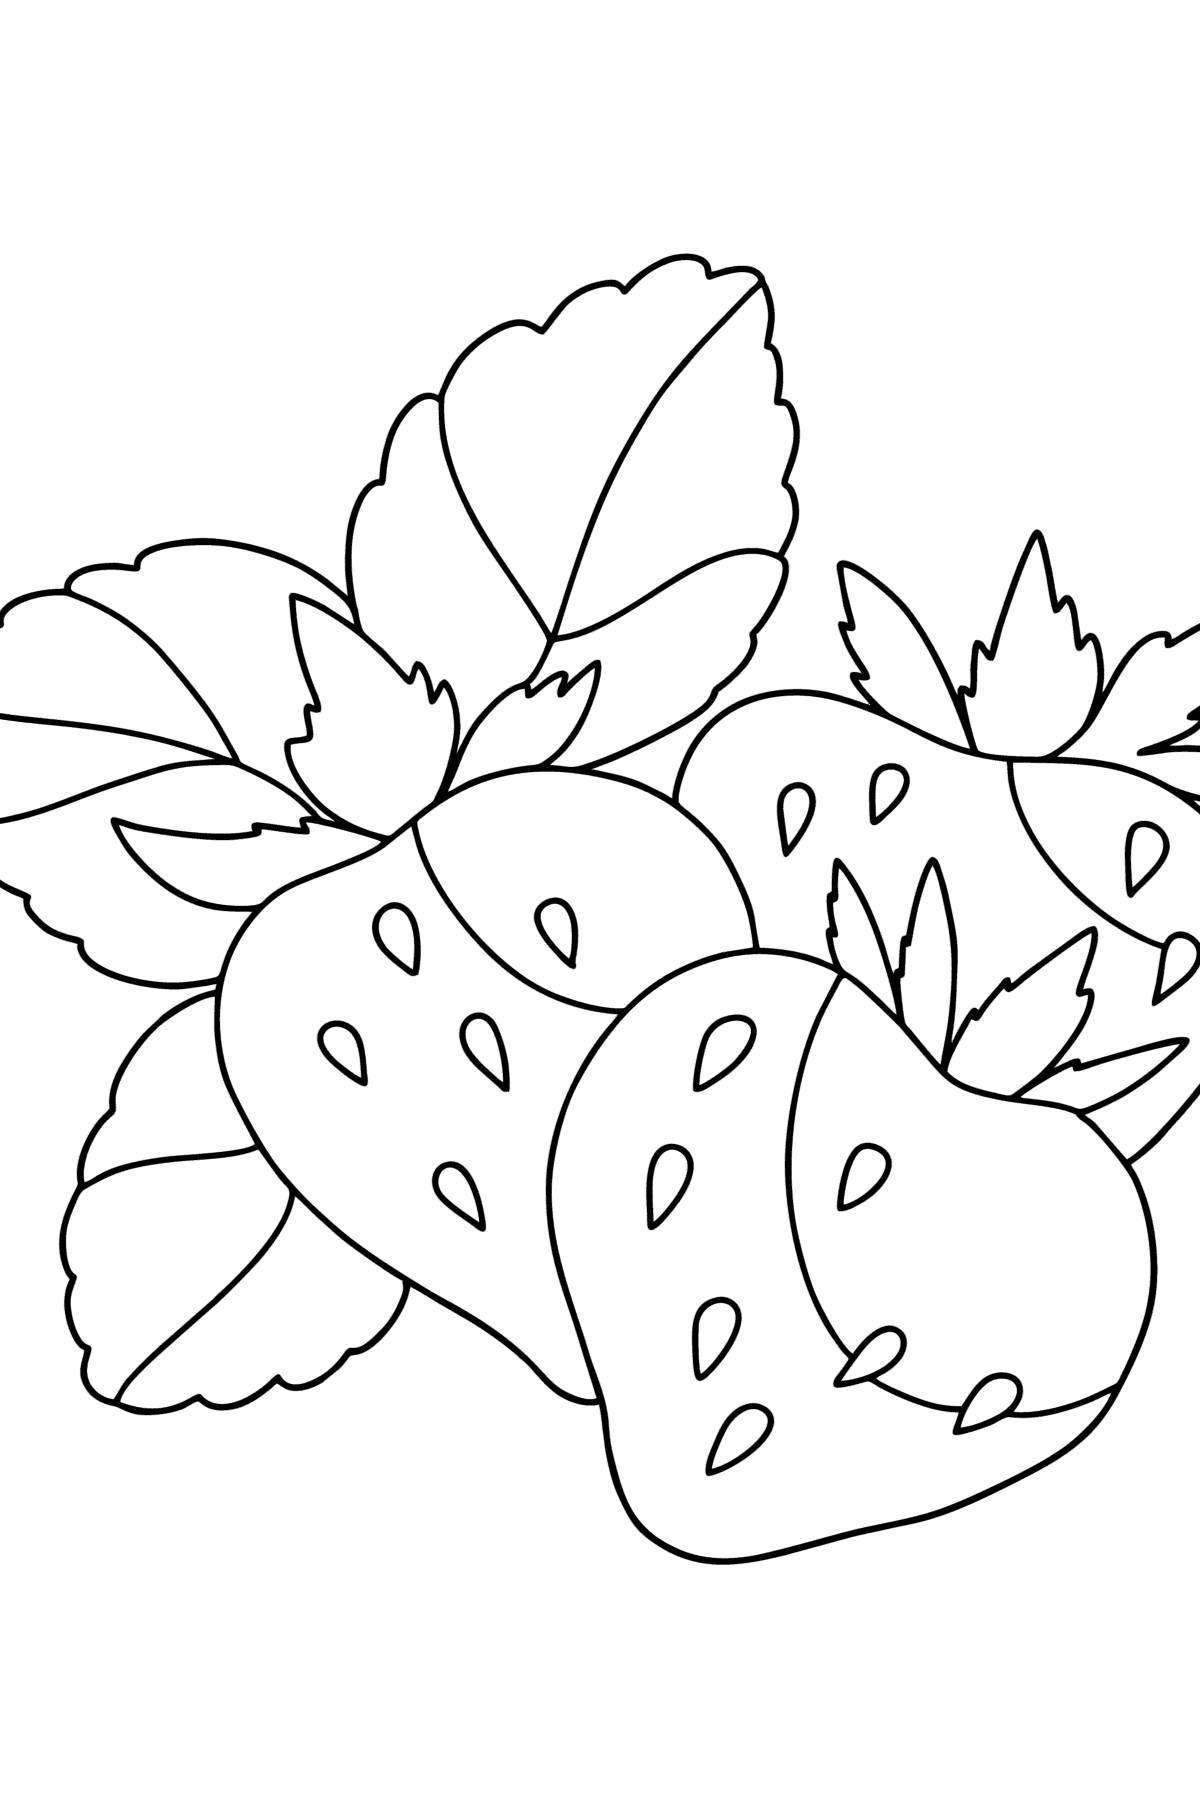 Bright strawberry coloring book for 3-4 year olds